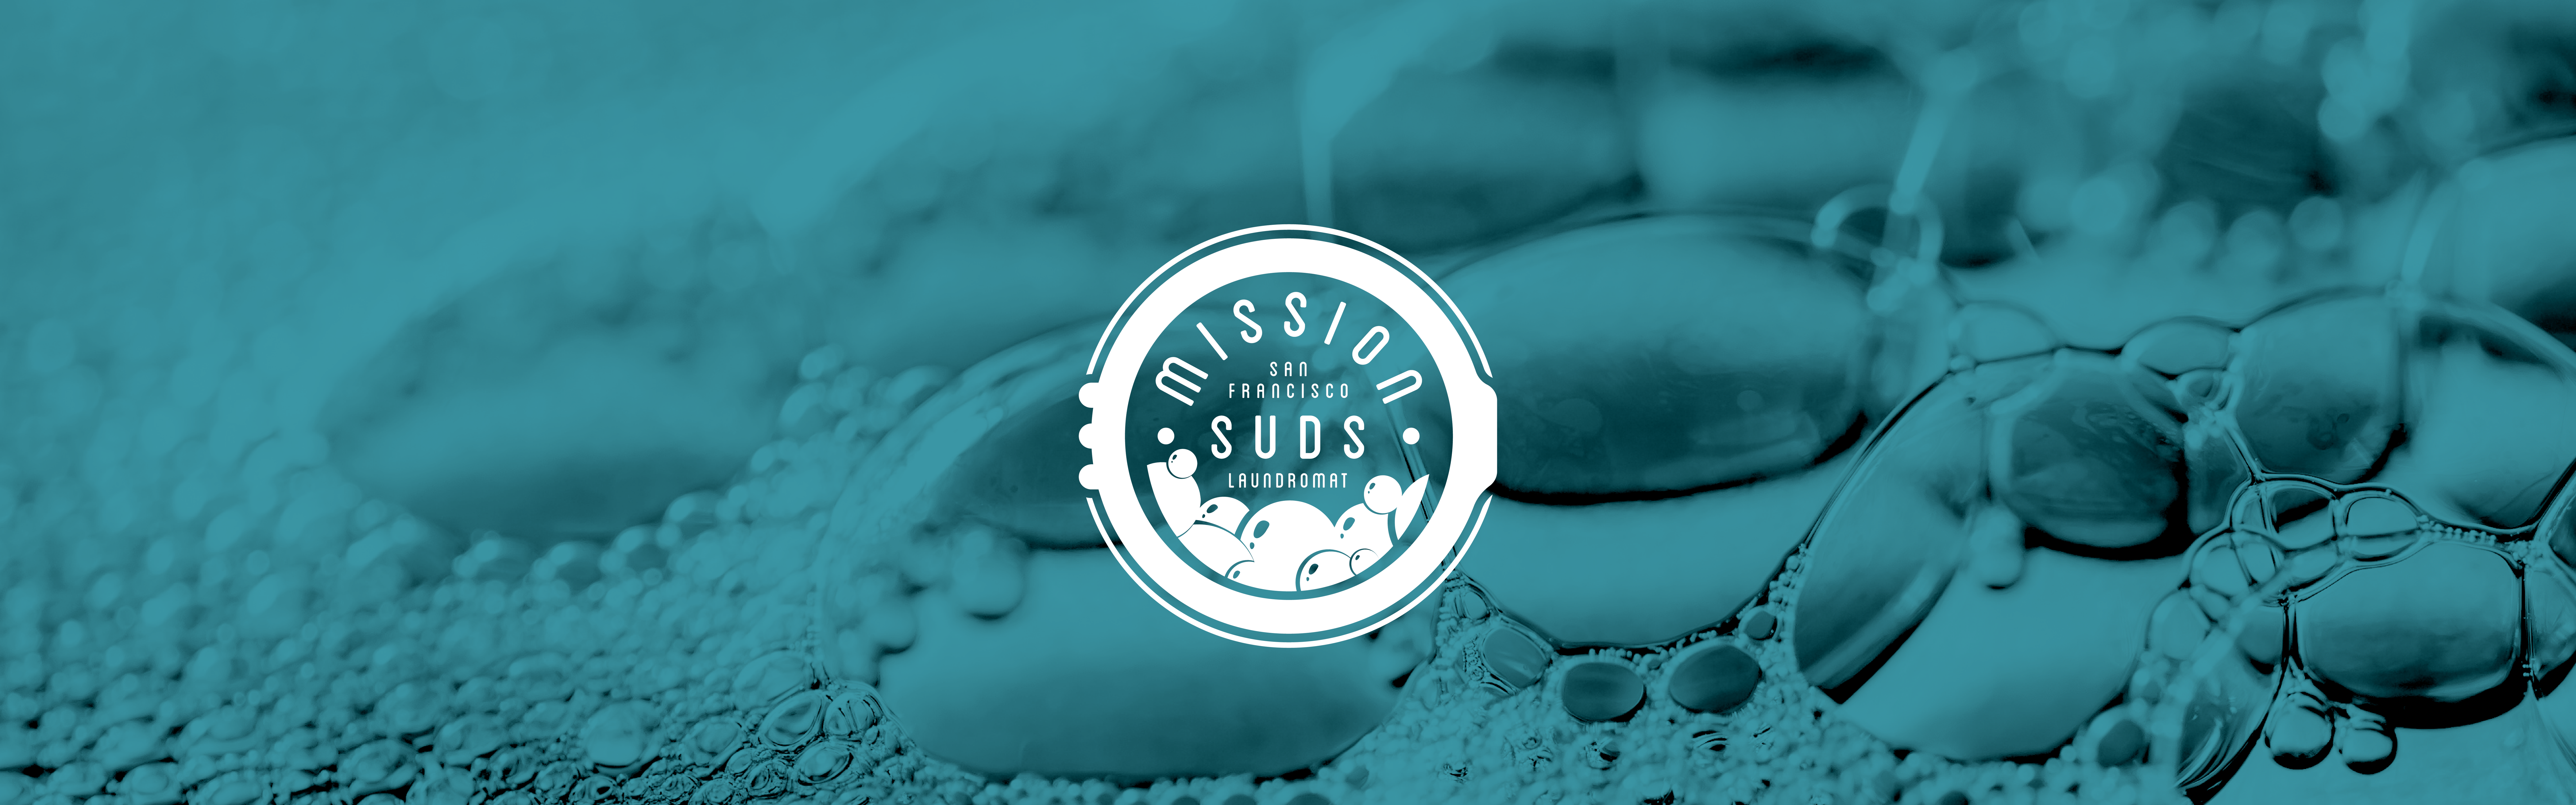 The image displays a blue-toned background with pebbles and bubbles, overlayed by a circular white logo for "Mission Suds Laundromat." The logo features a stylized representation of